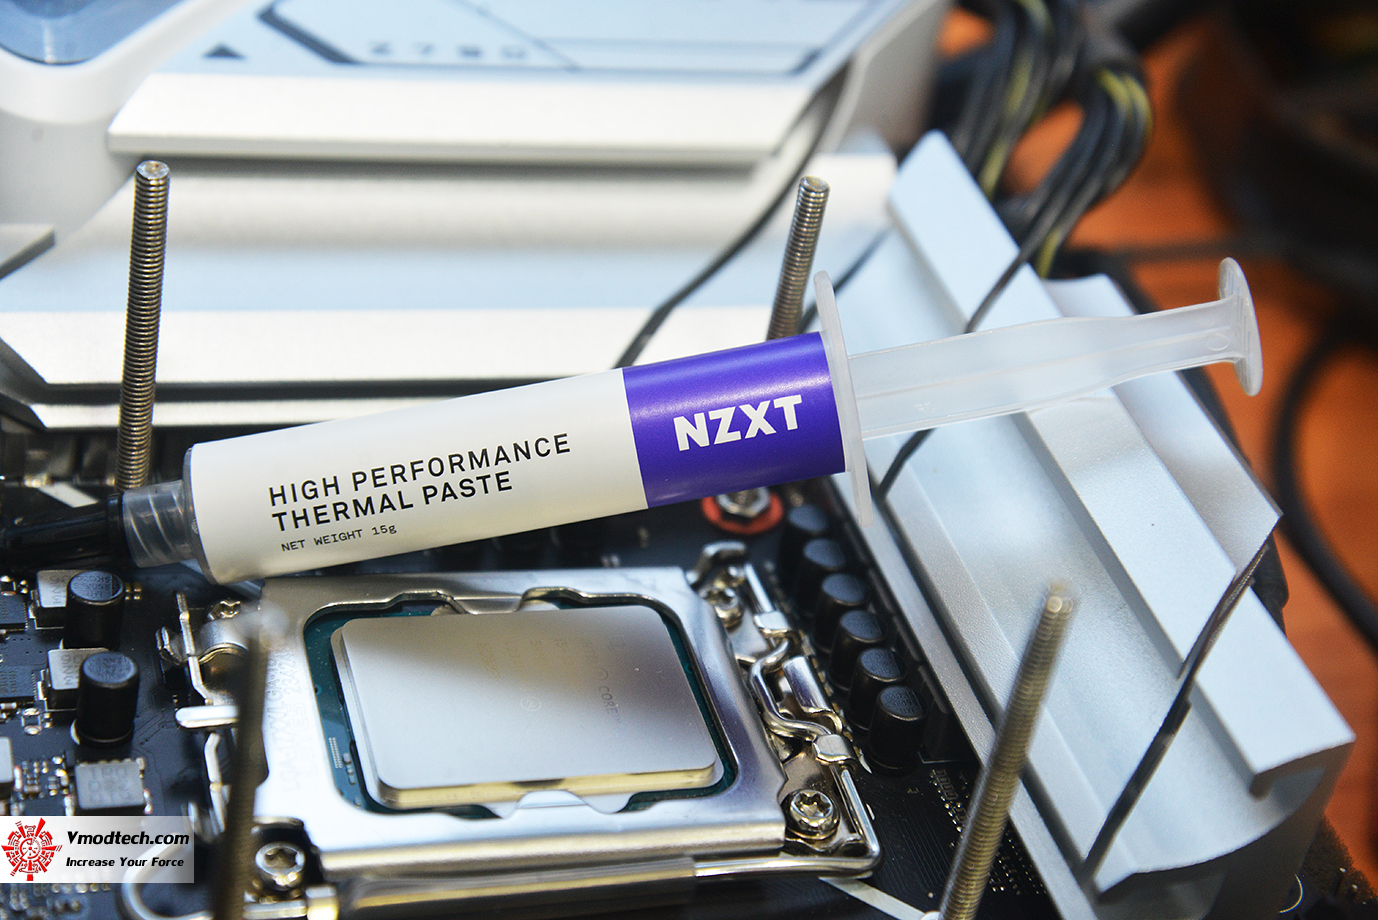 dsc 1522 NZXT High performance Thermal Paste (15g) Review